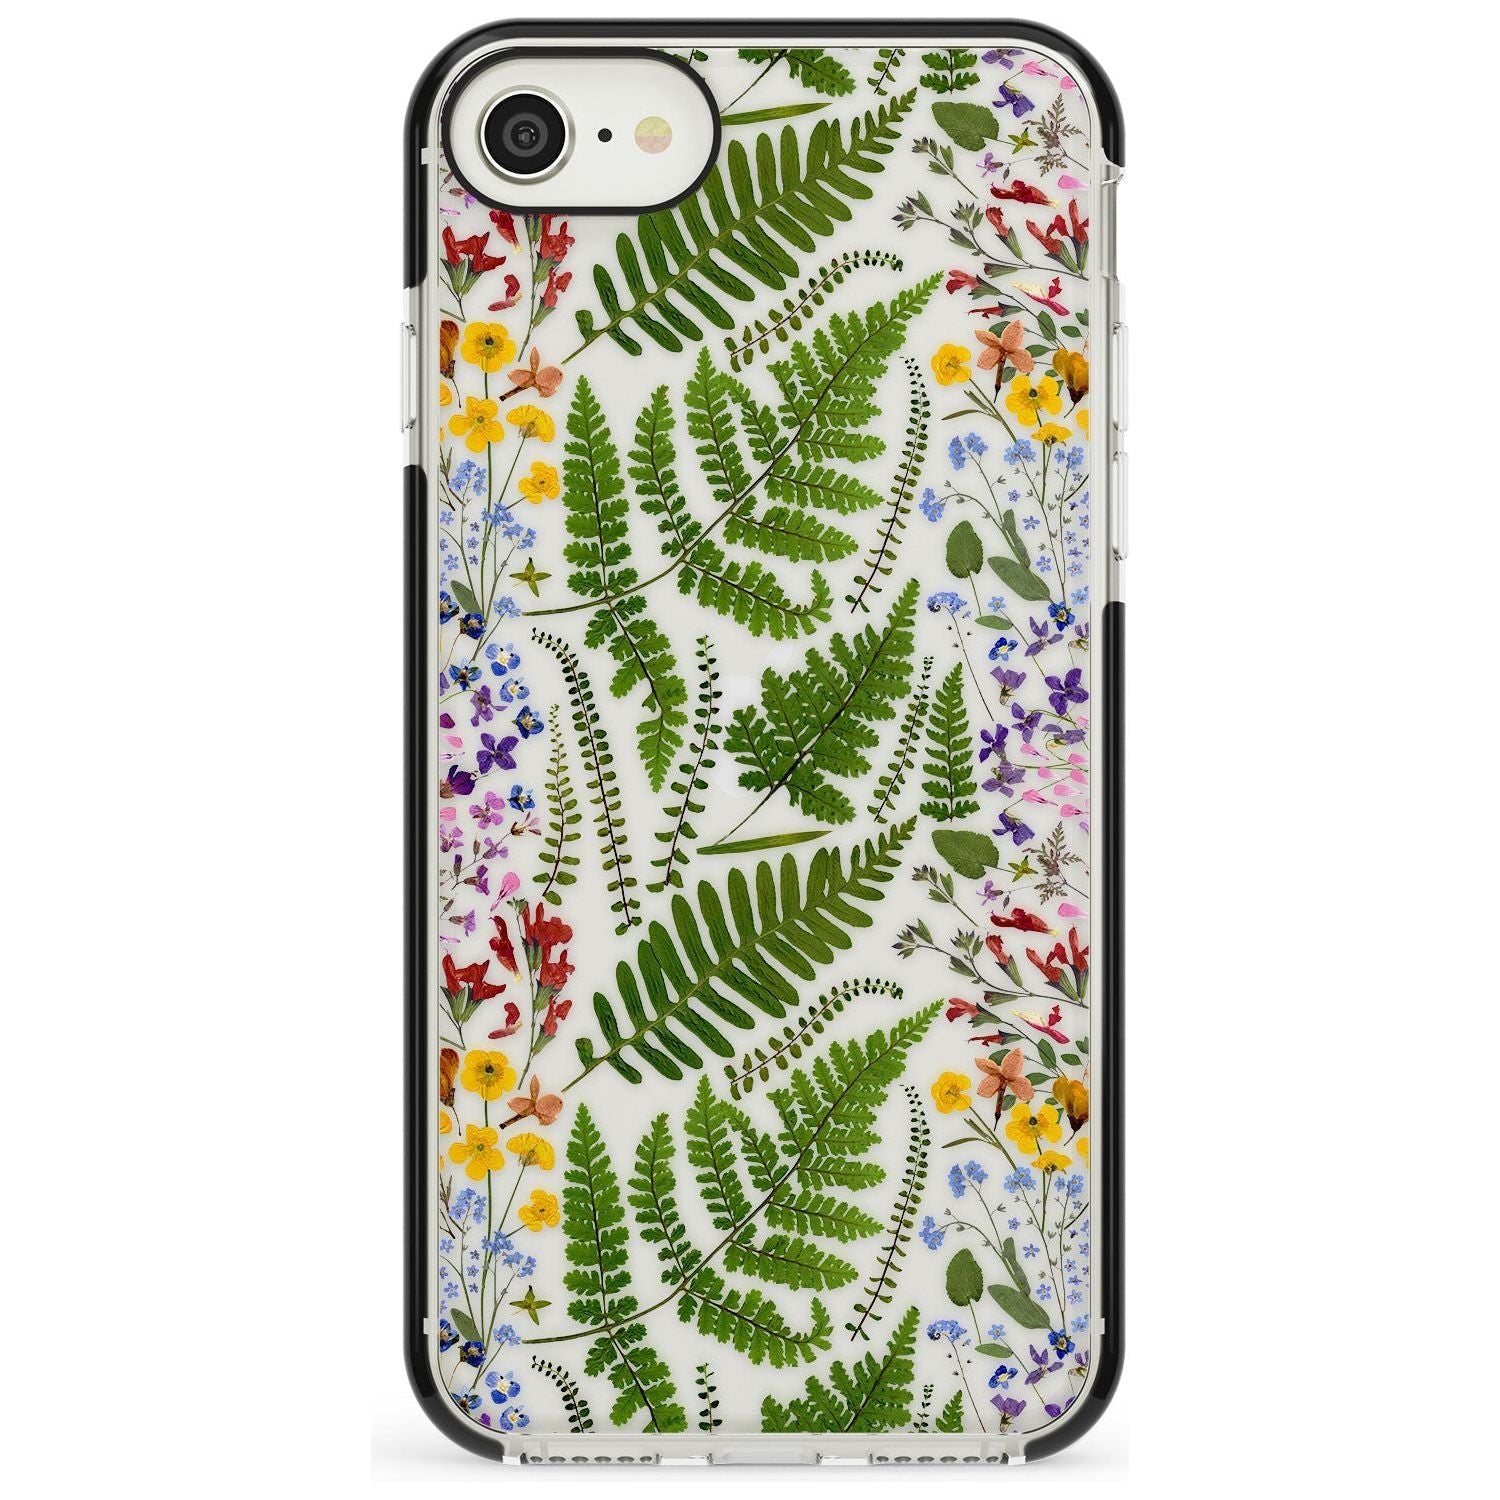 Busy Floral and Fern Design Black Impact Phone Case for iPhone SE 8 7 Plus